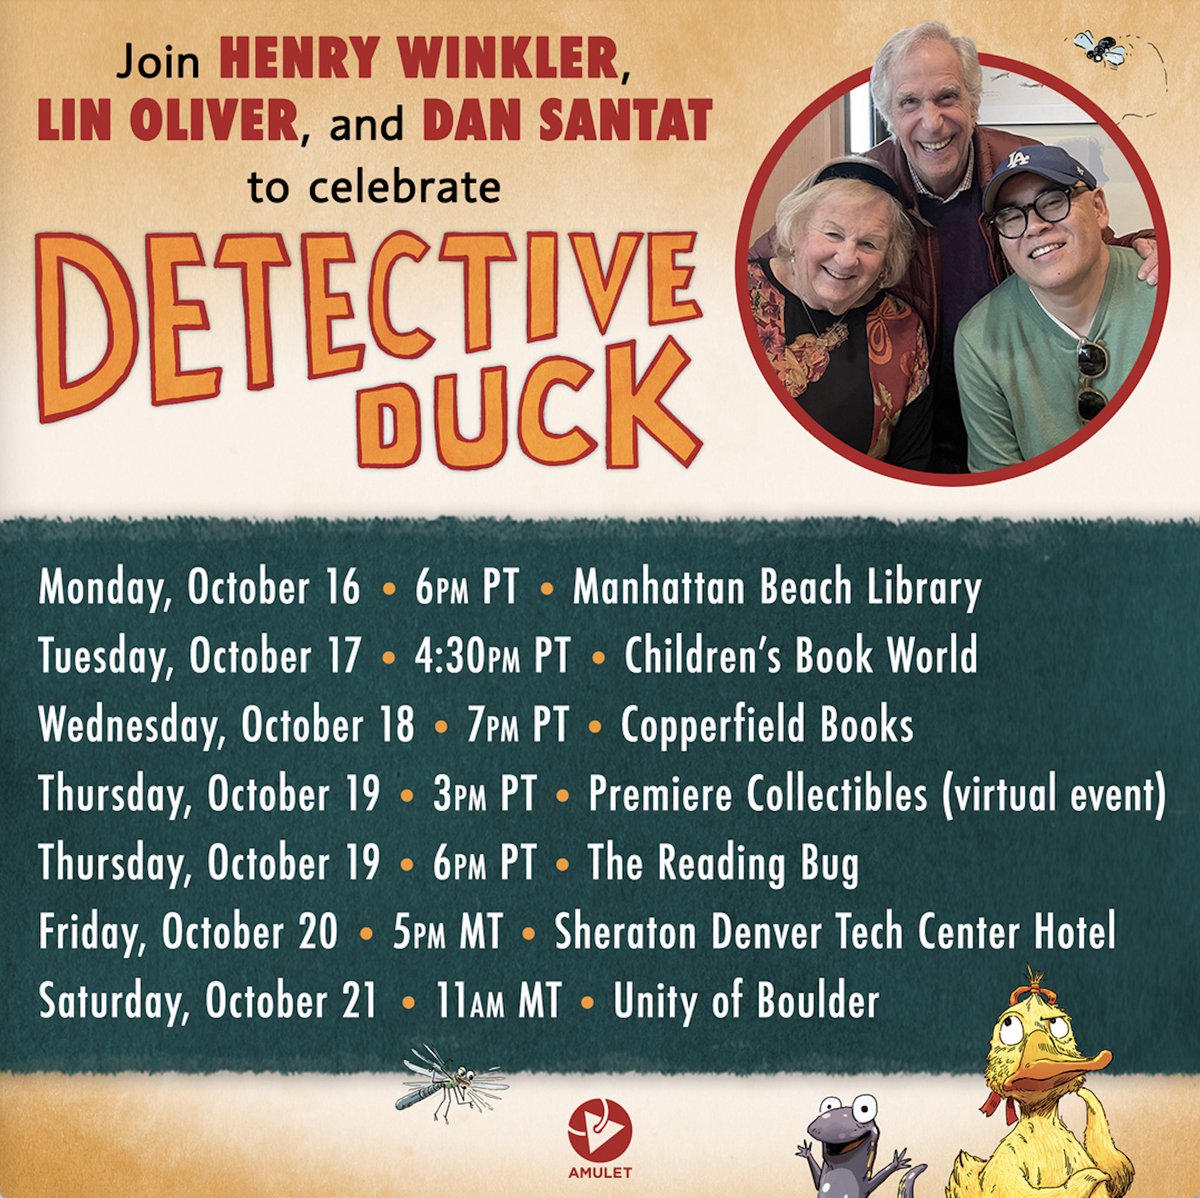 Hi friends. If you're in the neighborhood for any of the appearances here, we'd love to see you. Drop in. ⁦@abramskids⁩ ⁦@dsantat⁩ ⁦@hwinkler4real⁩